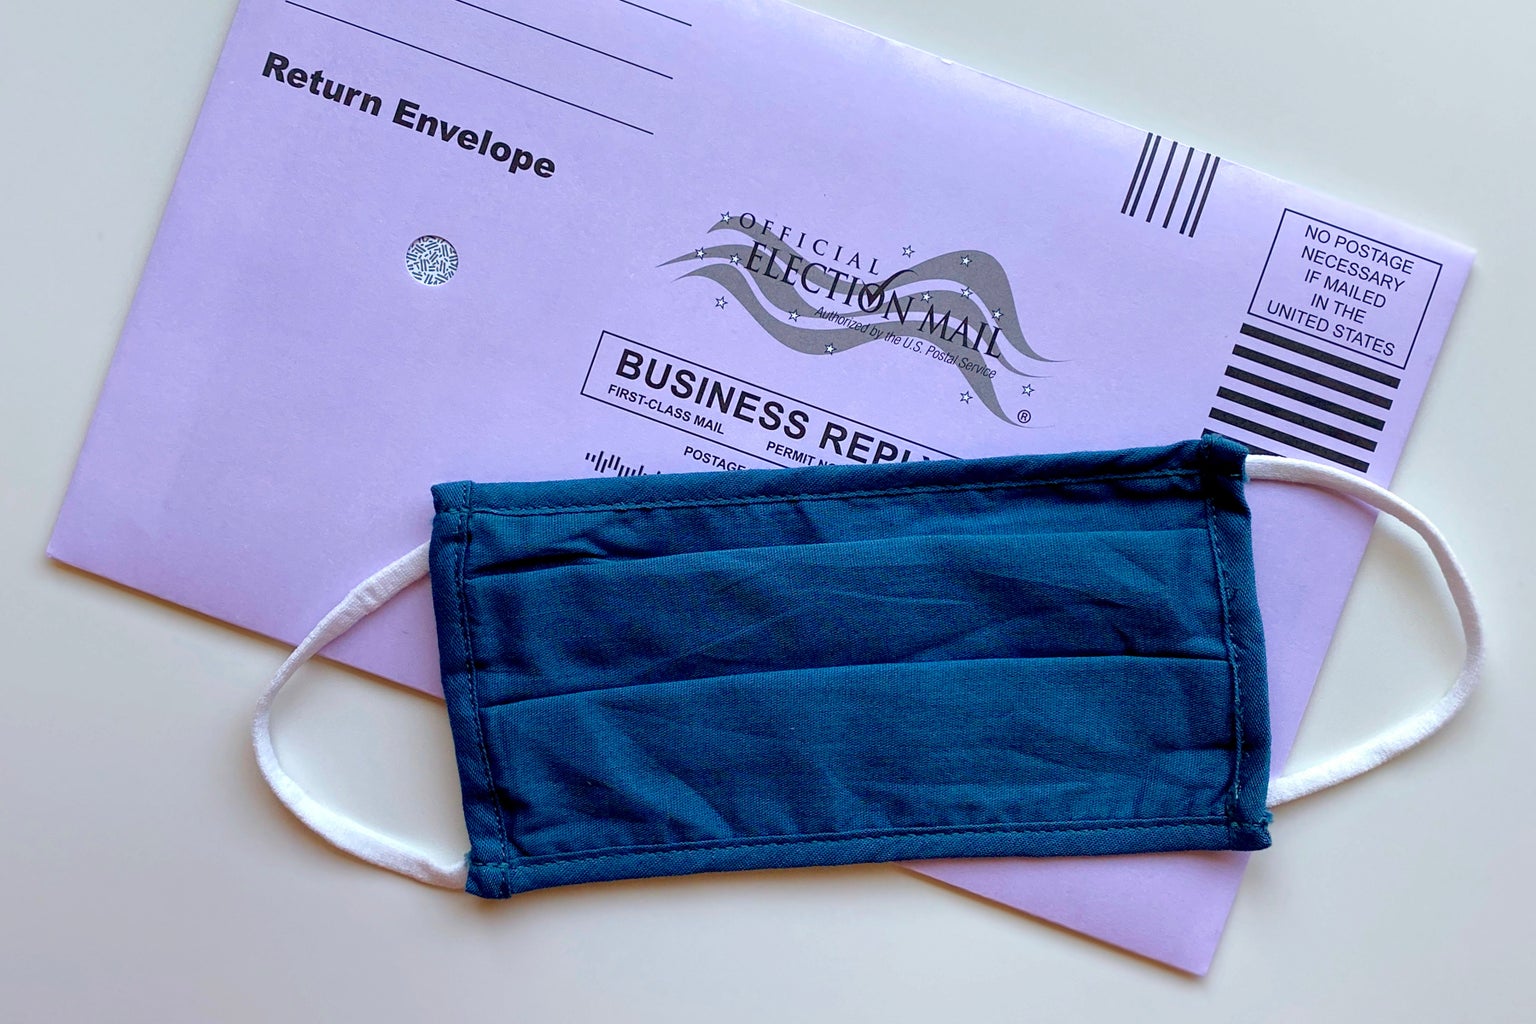 mail in ballot with mask by Tiffany Tertipes on Unsplash